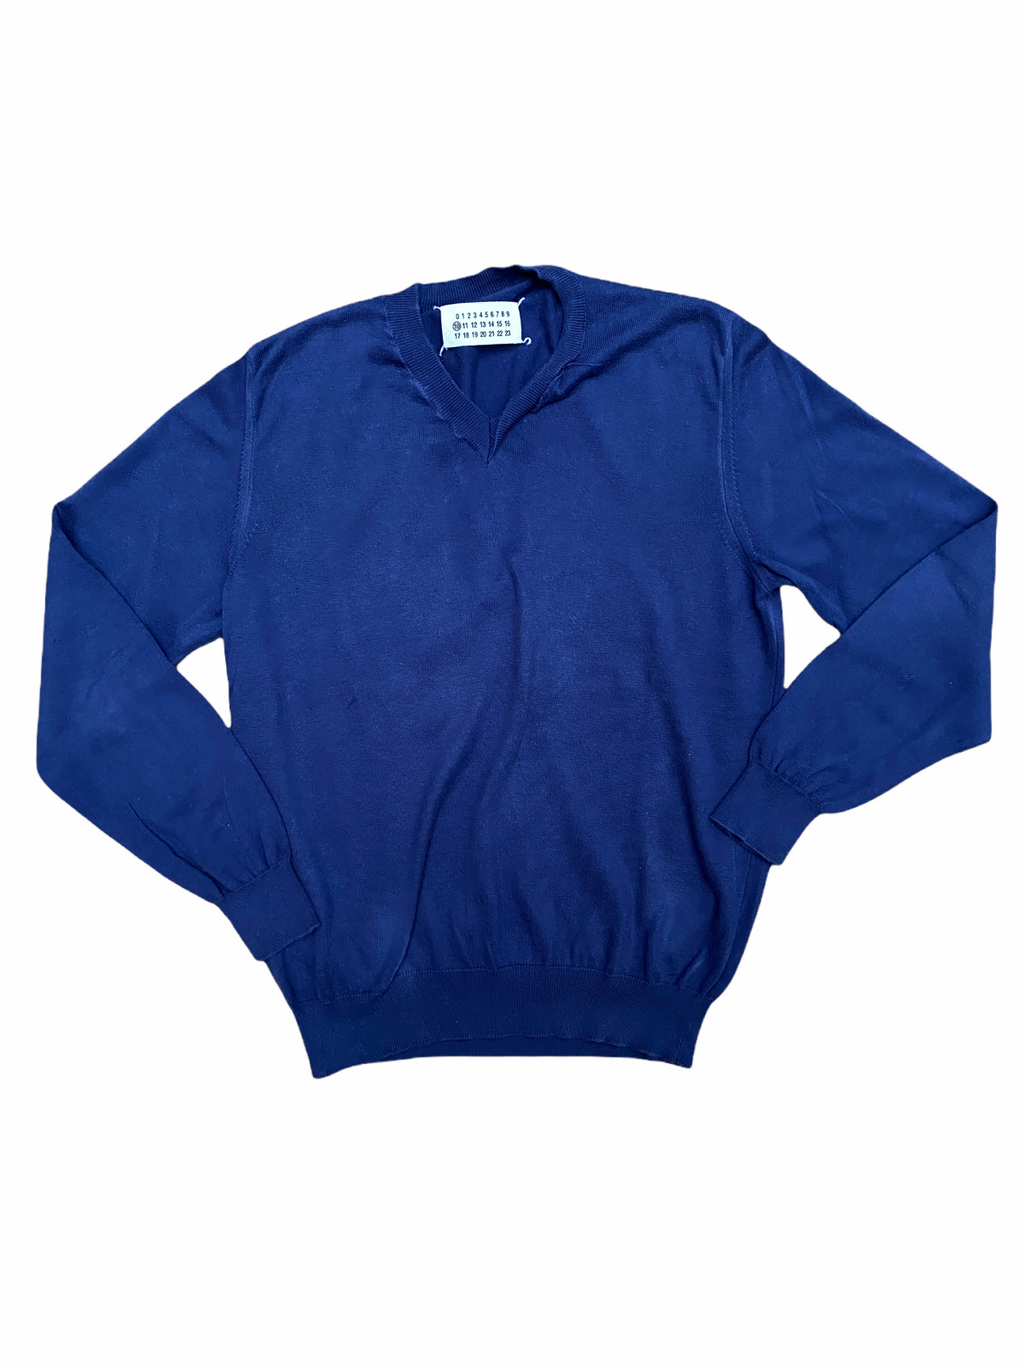 FW 2010 Navy Twisted Collar Sweater Size S